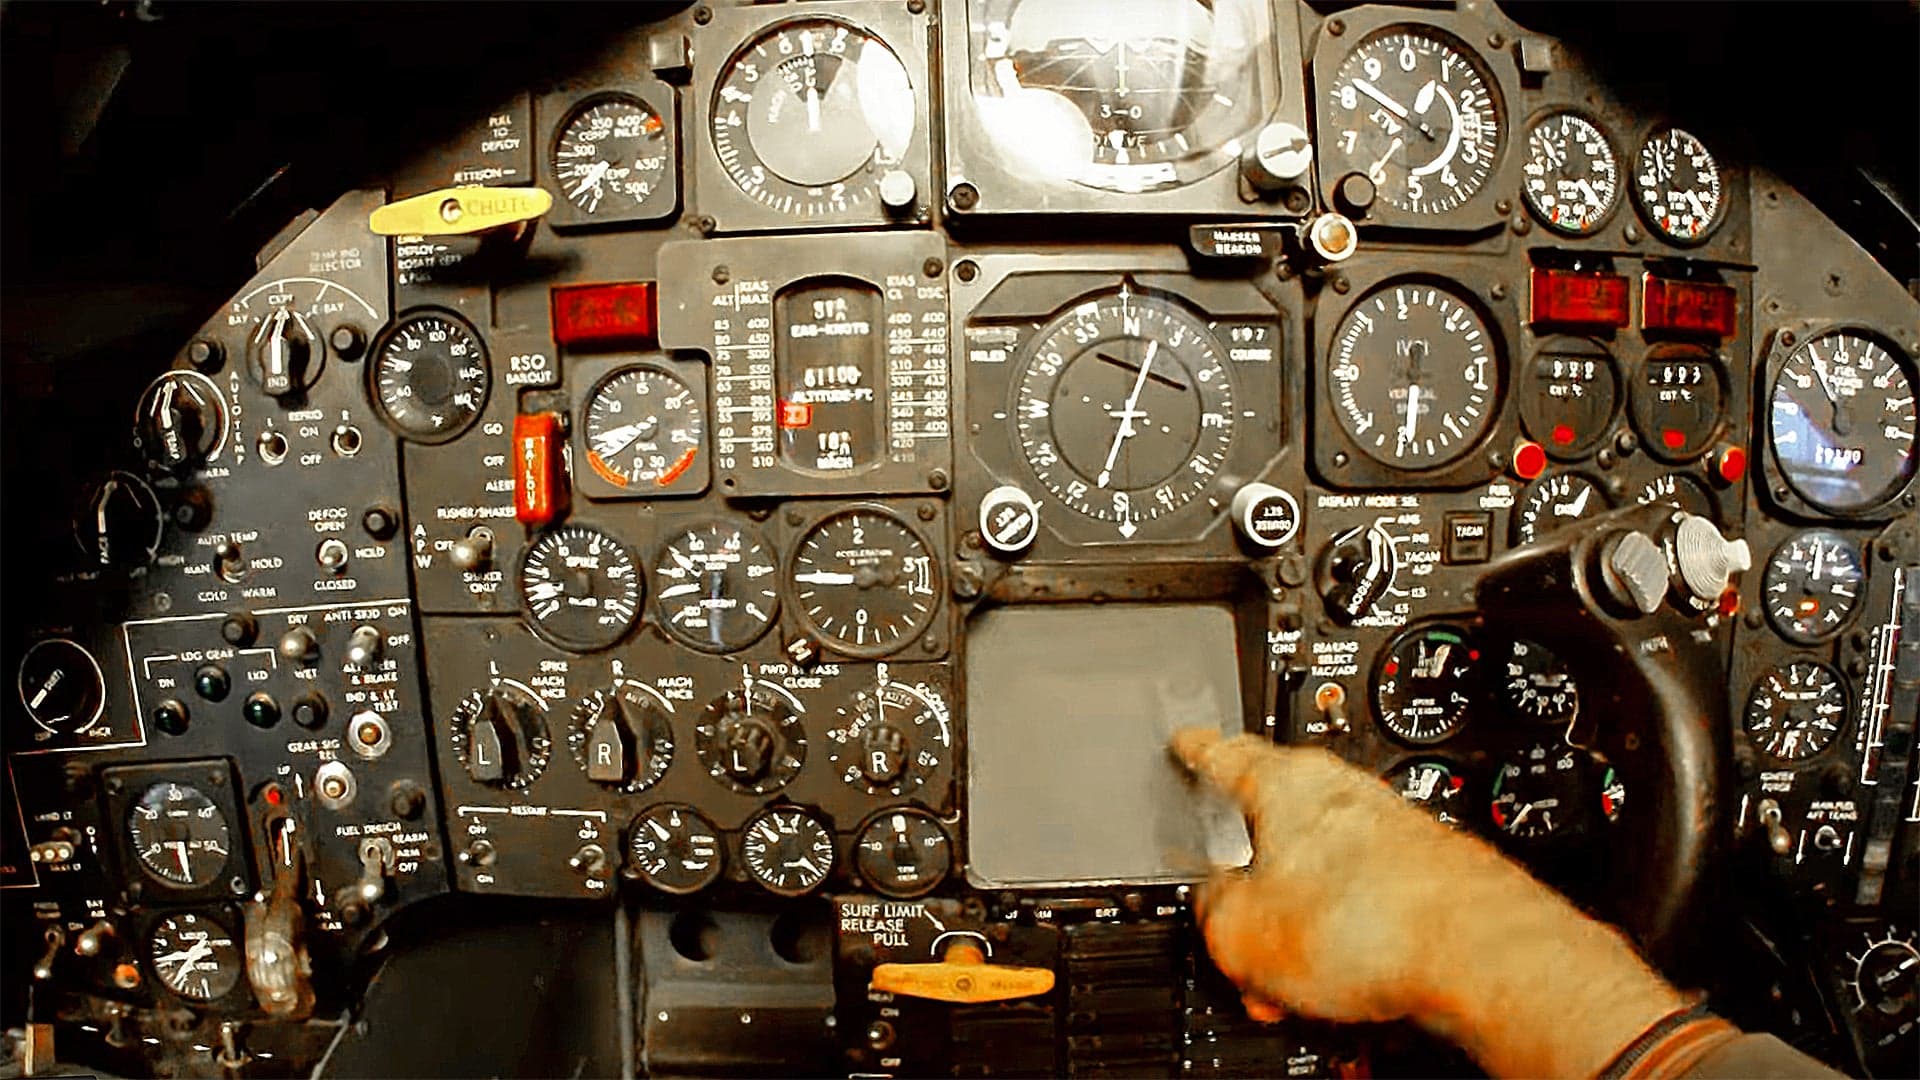 This SR-71 Blackbird Cockpit Tour Is The Most Fascinating Thing You’ll See All Week